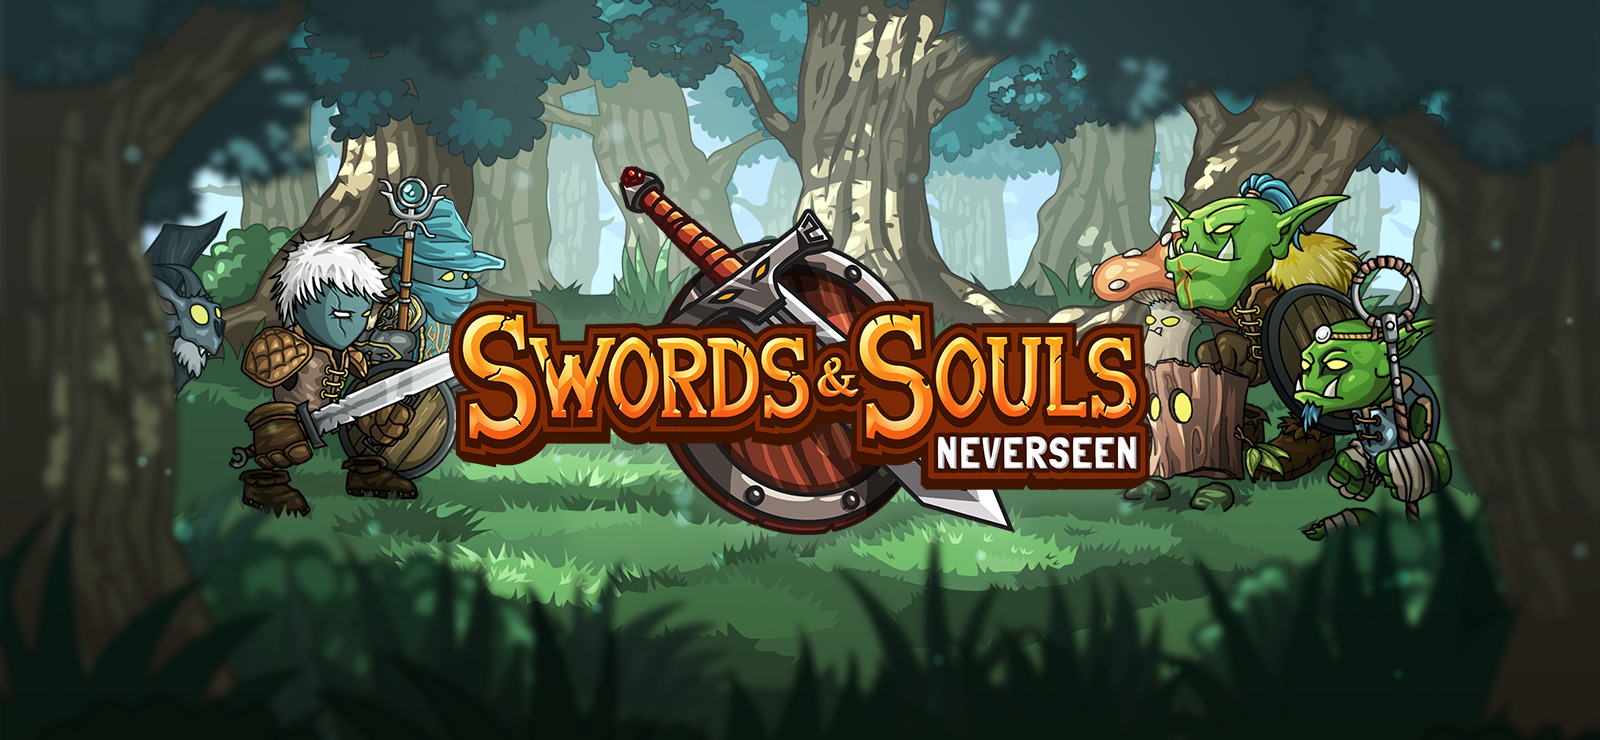 swords and souls never seen hacked